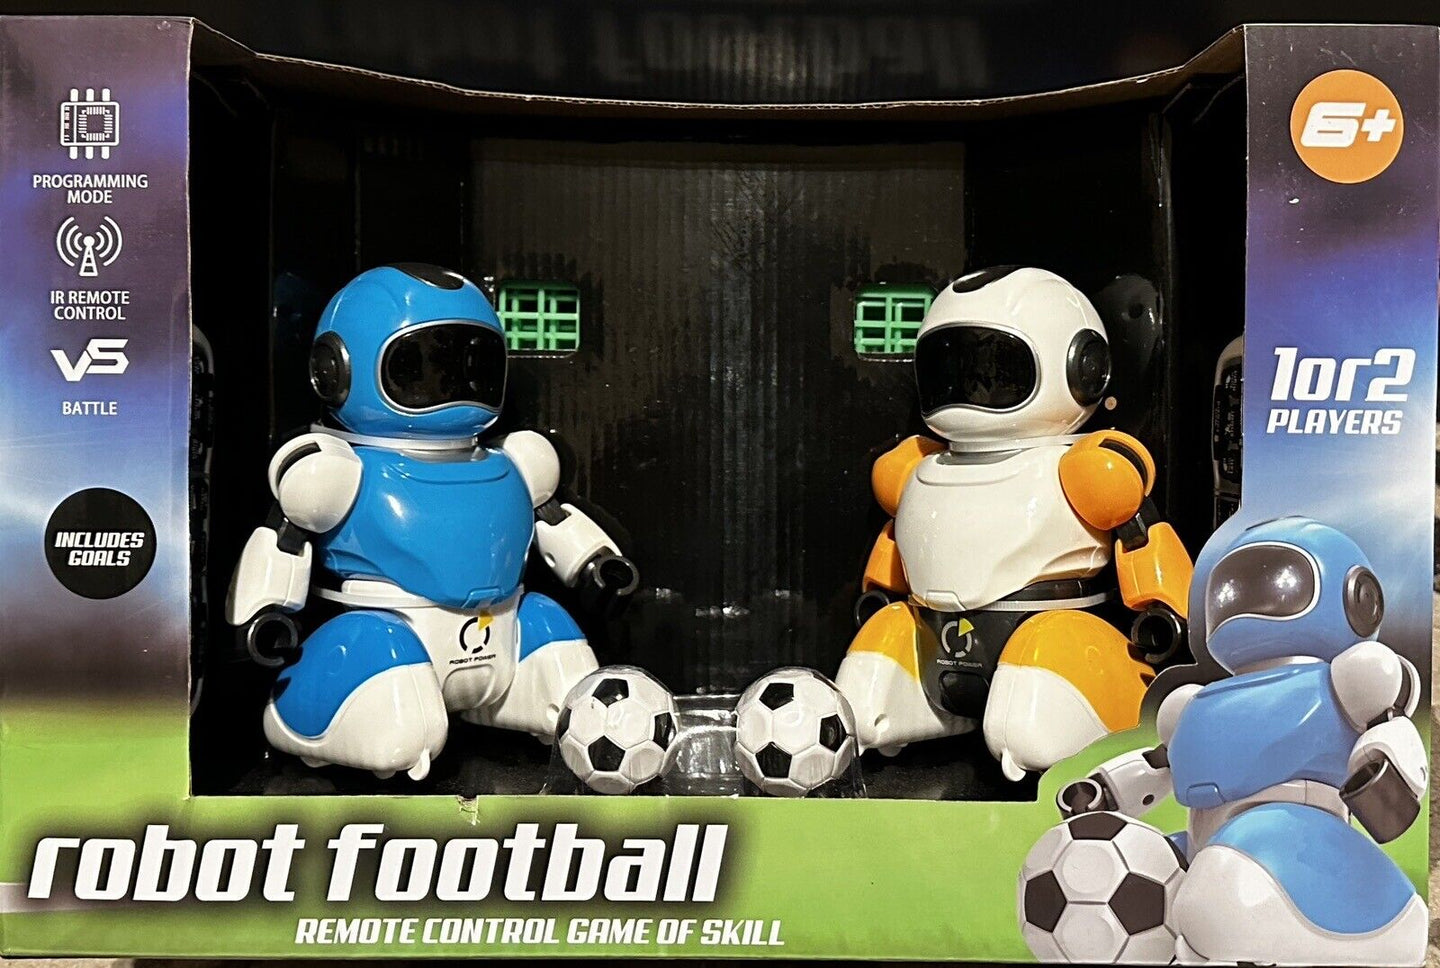 Robot Football-Remote controlled game of skill 1/2 player game - Chys Thijarah